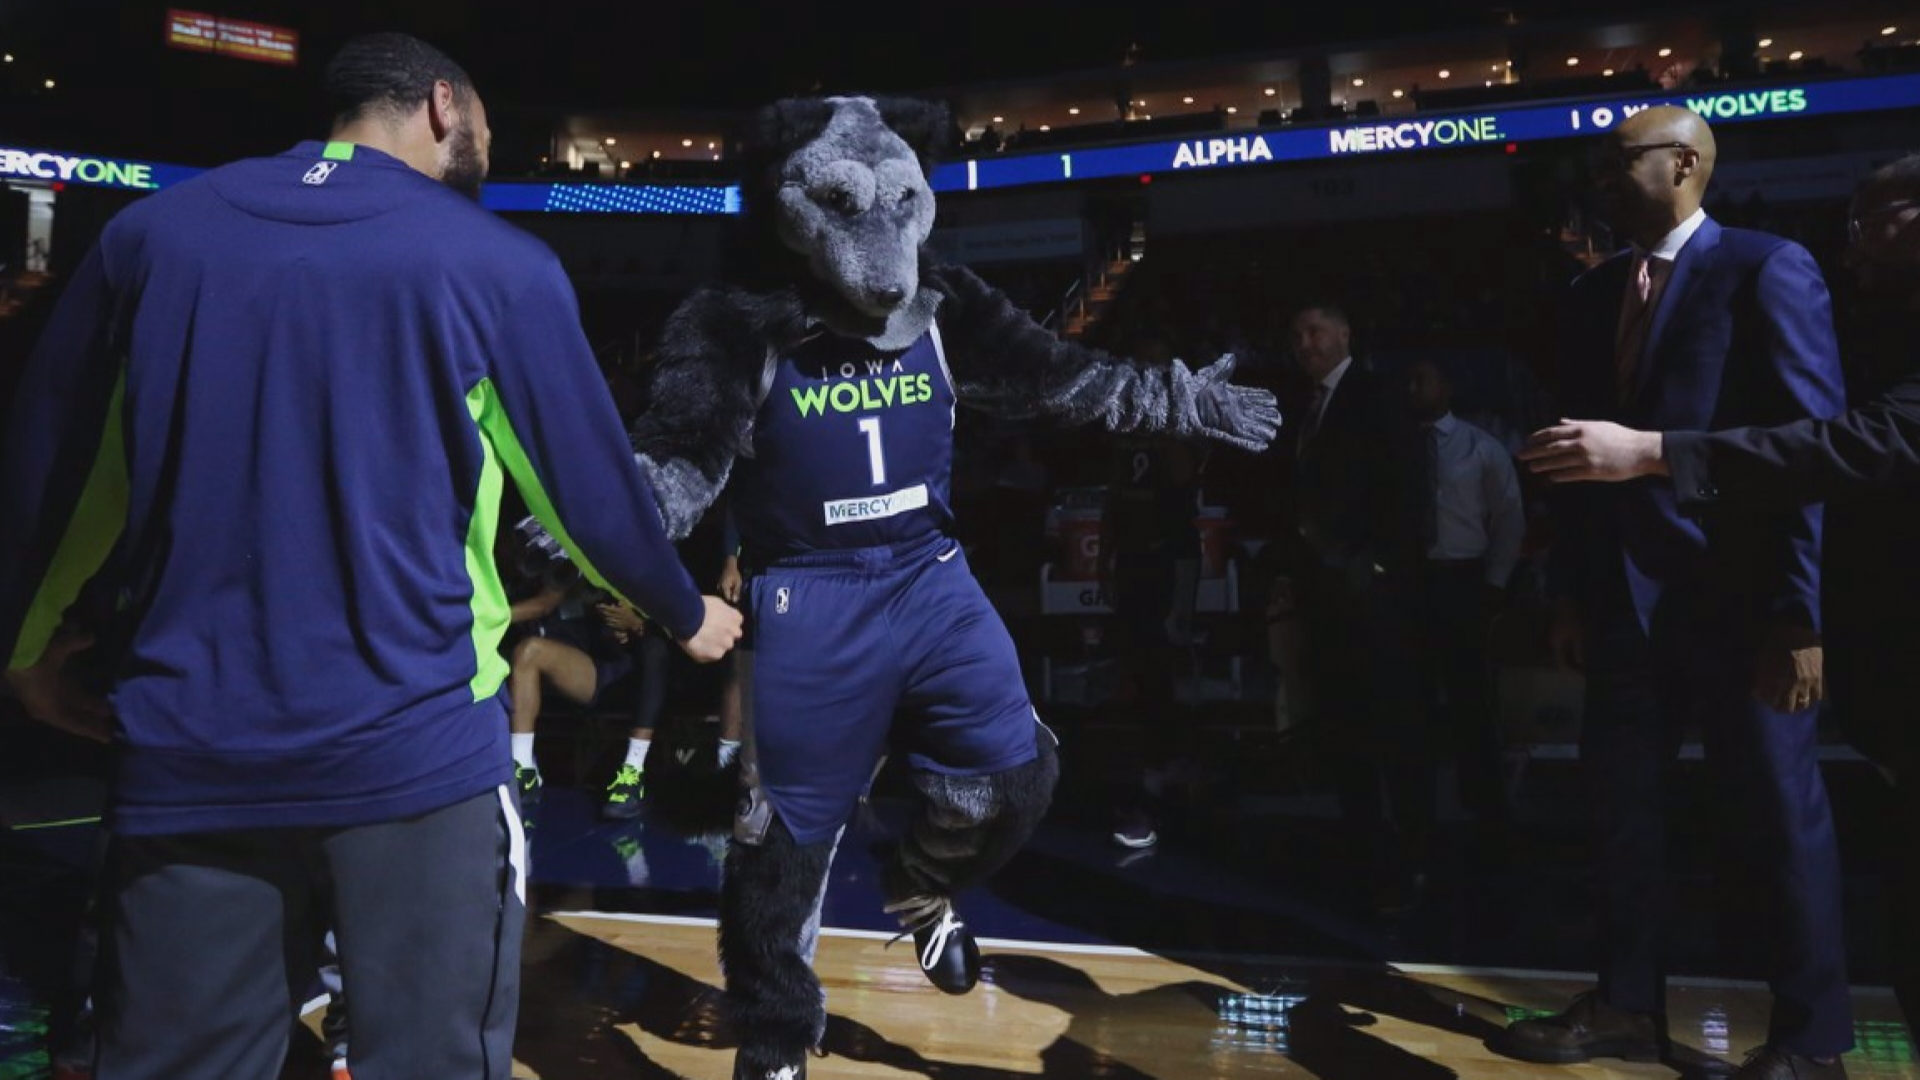 ‘Alpha’ the mascot for the Iowa Wolves of the NBA’s G-League.